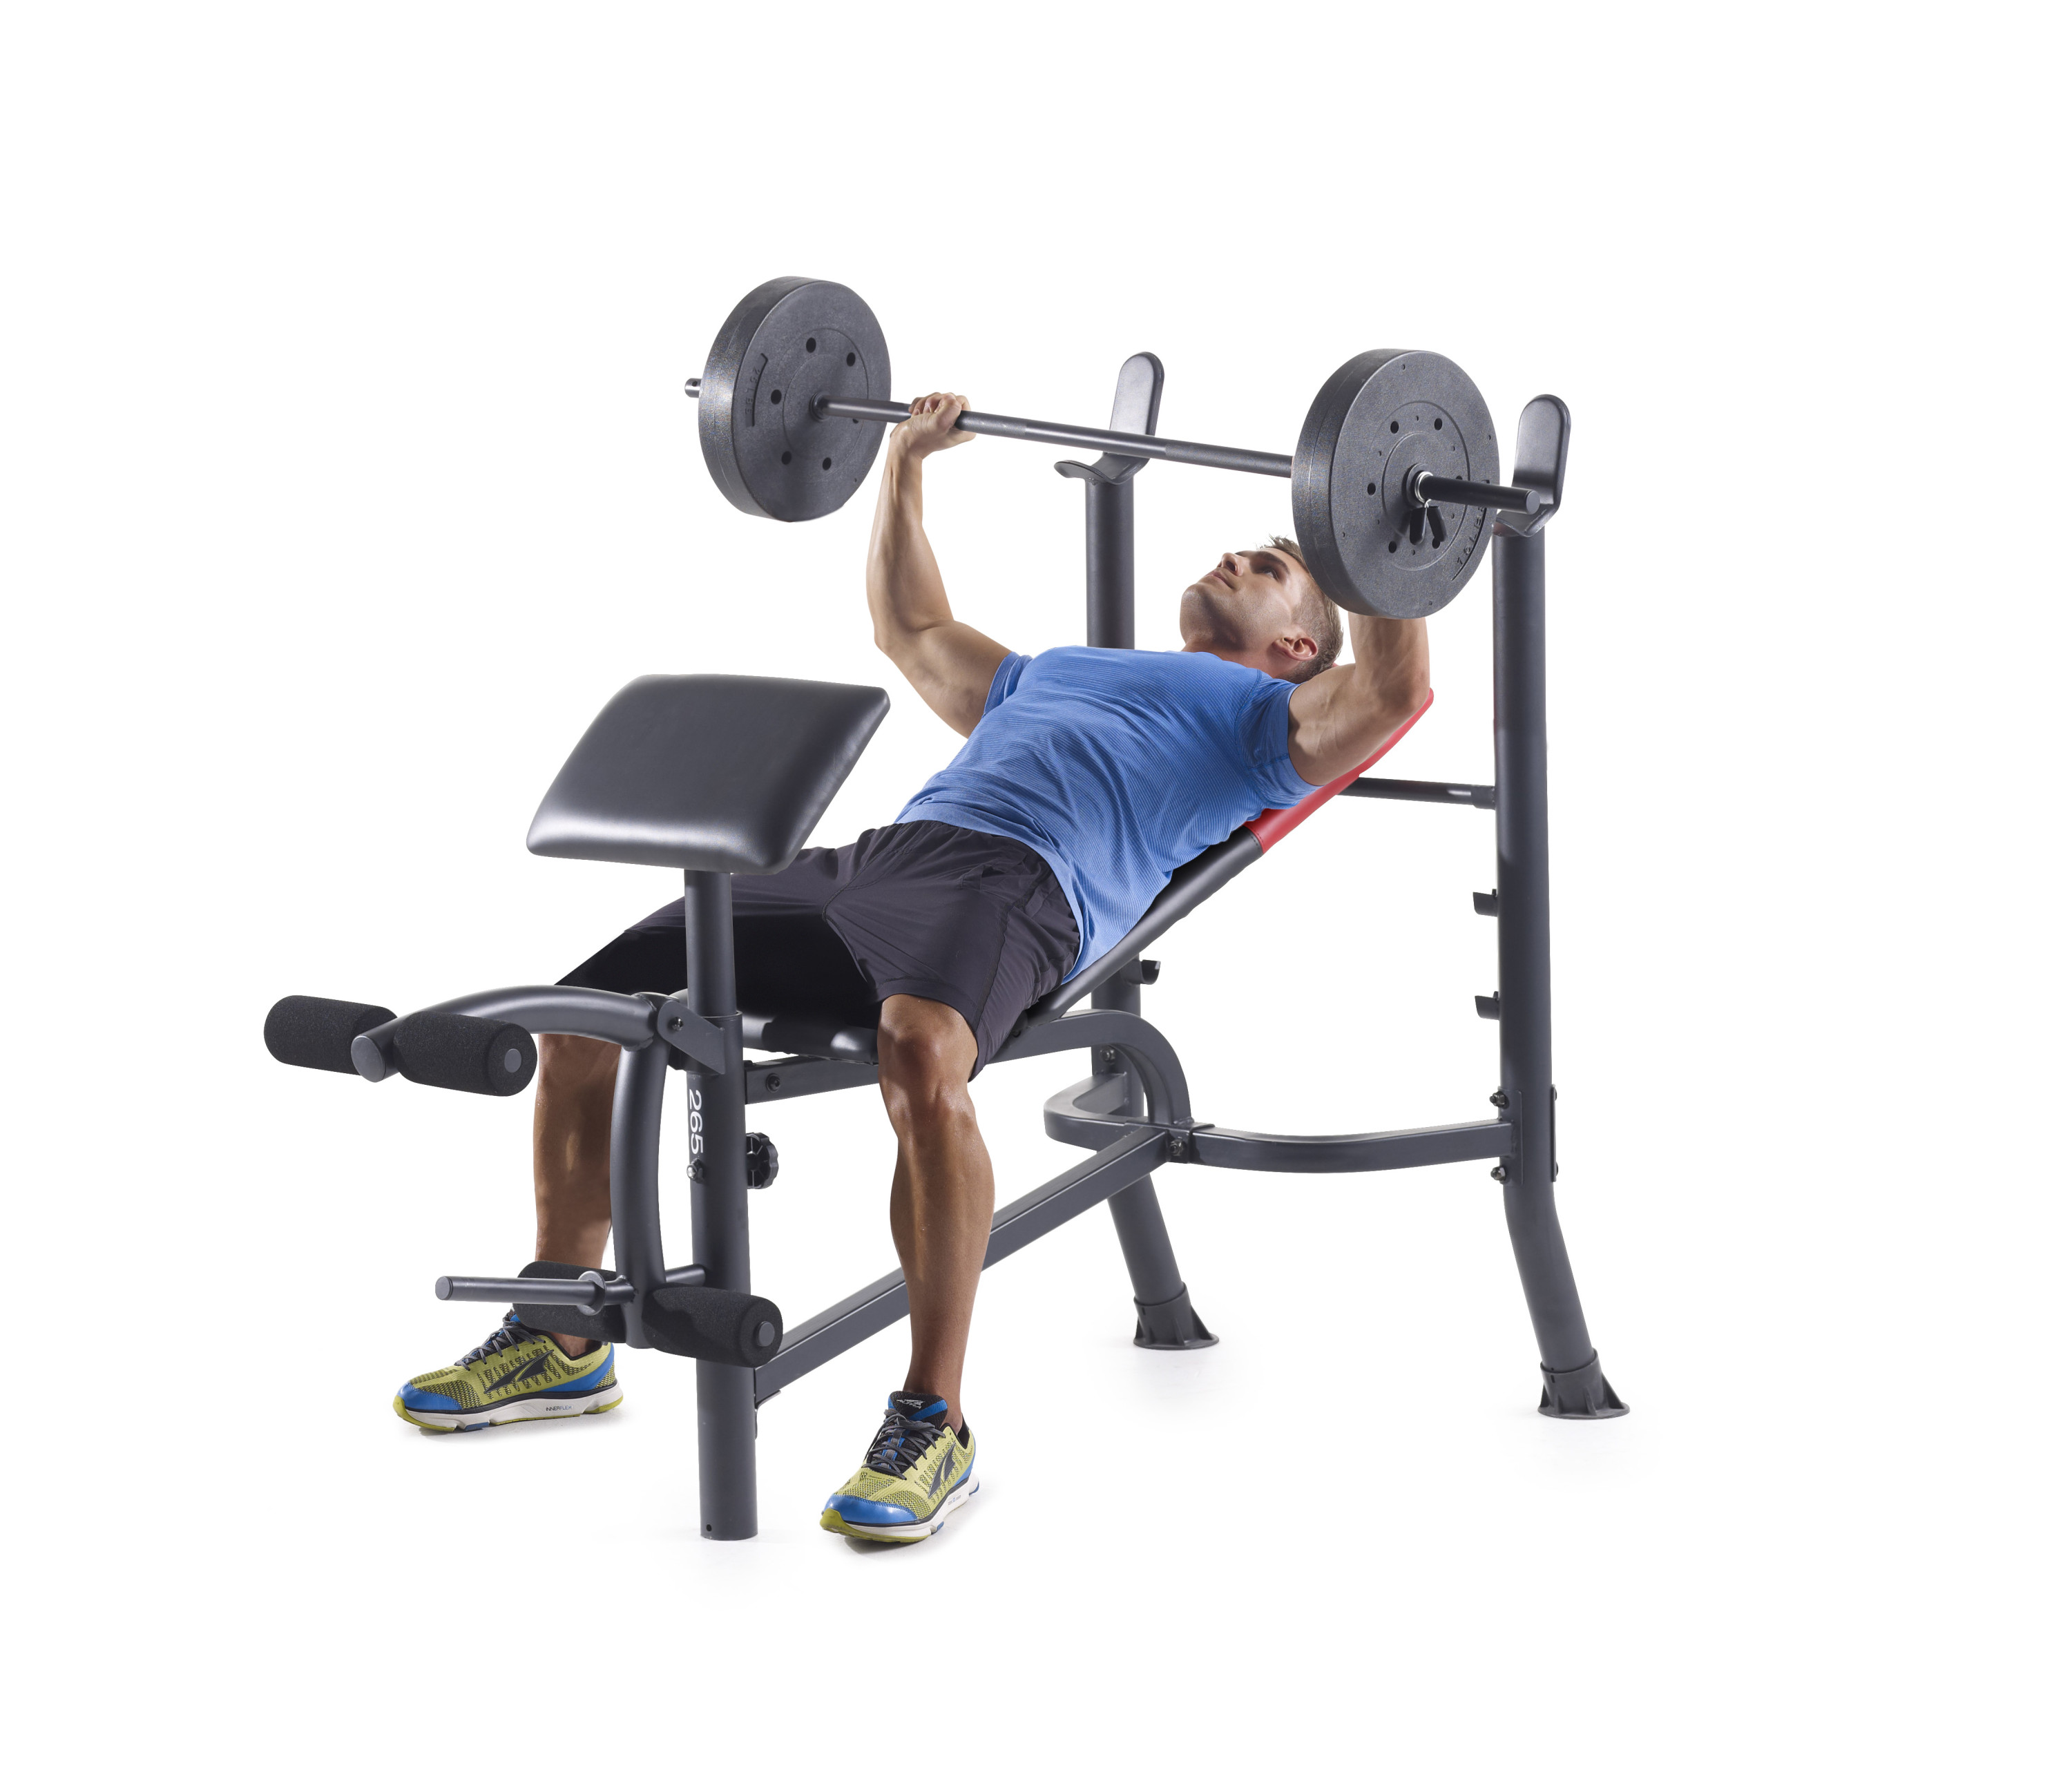 Weider Pro 265 Standard Weight Bench with 80 lb. Vinyl Weight Set - image 5 of 8